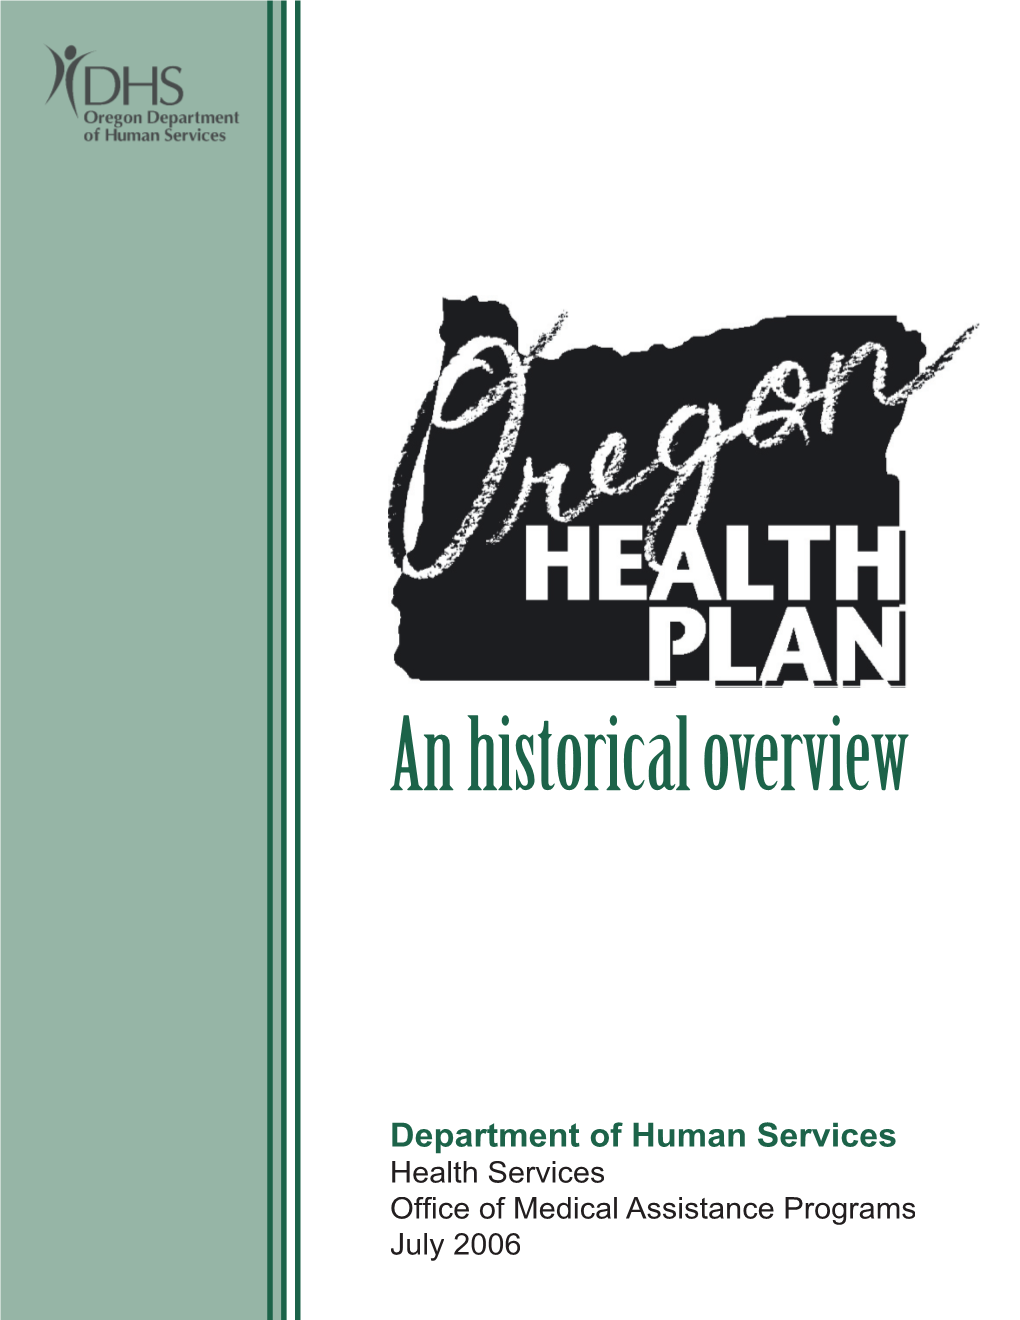 Oregon Health Plan (OHP) Is a Public and Private Partnership to Ensure Access to Health Care for All Oregonians